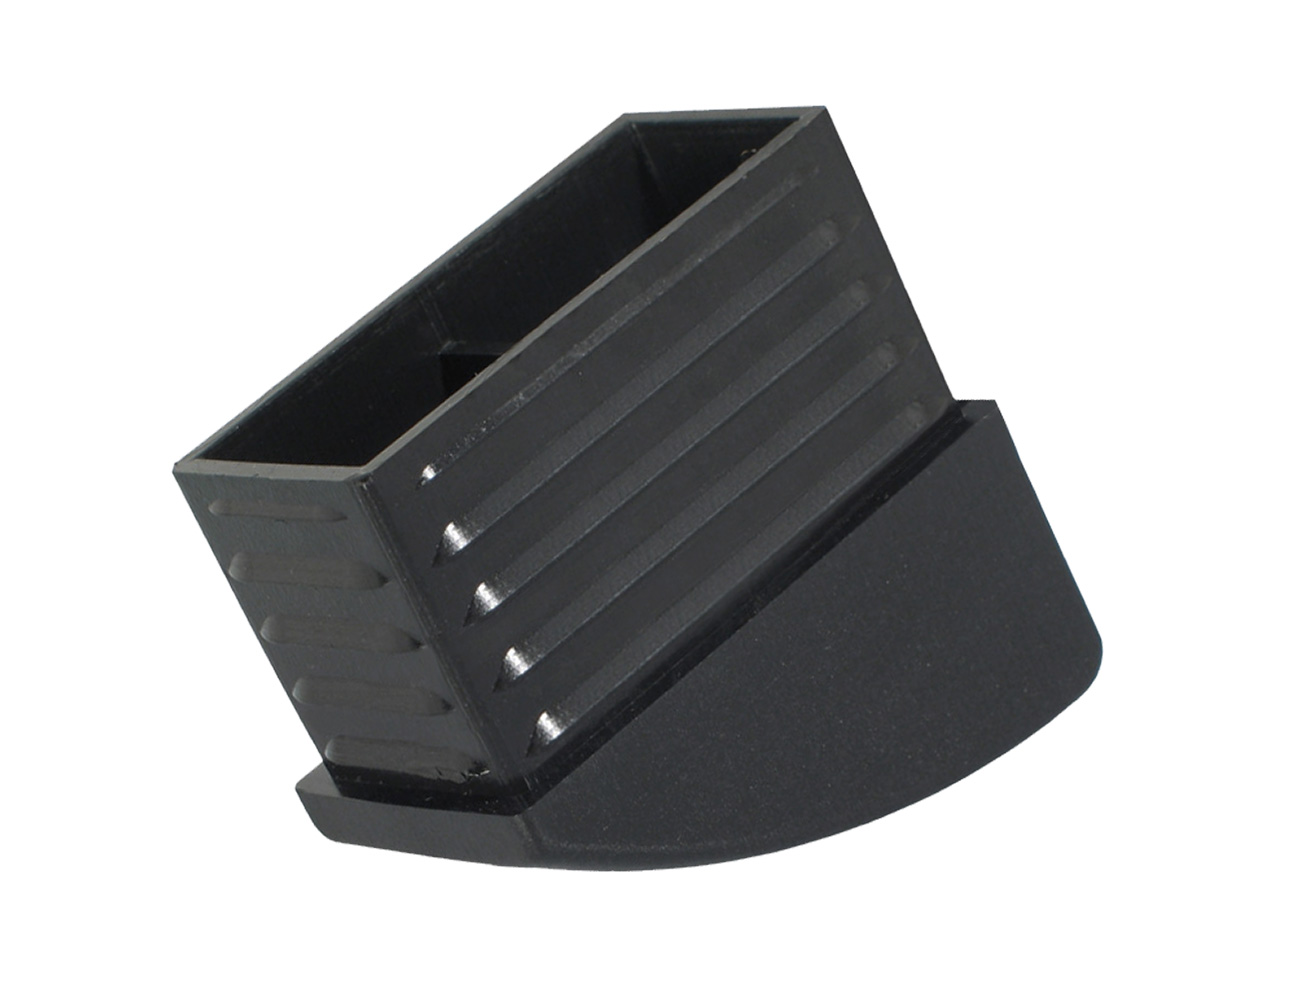 Rectangular end cap inserts with curved/domed base